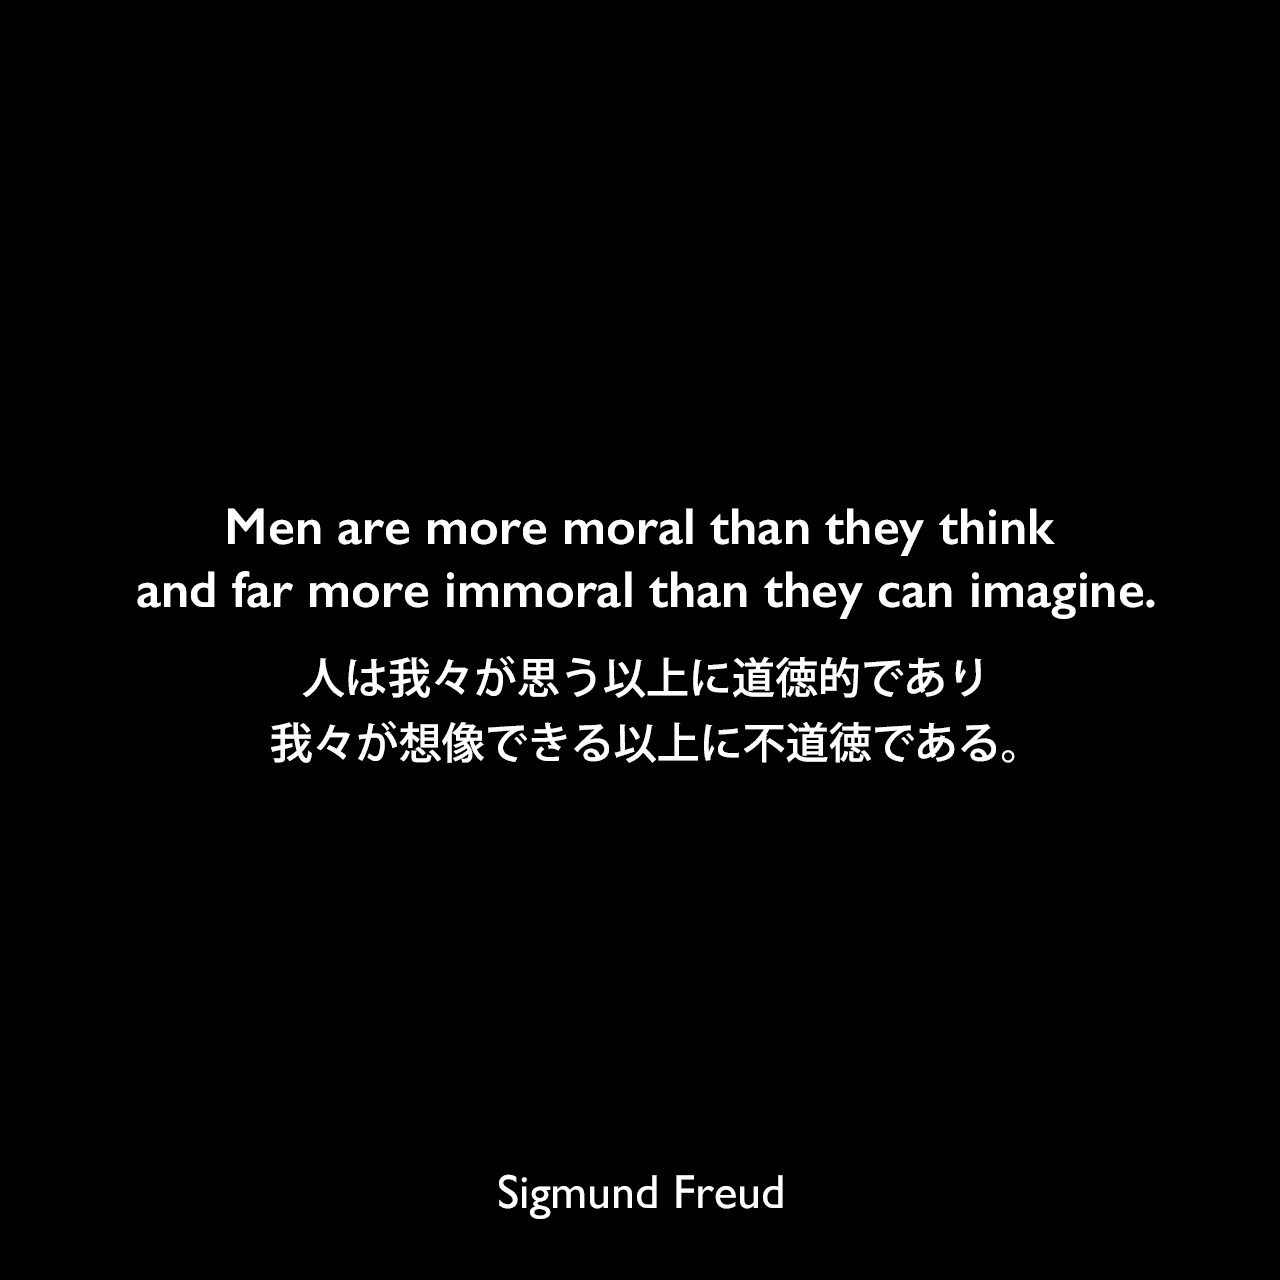 Men are more moral than they think and far more immoral than they can imagine.人は我々が思う以上に道徳的であり、我々が想像できる以上に不道徳である。Sigmund Freud